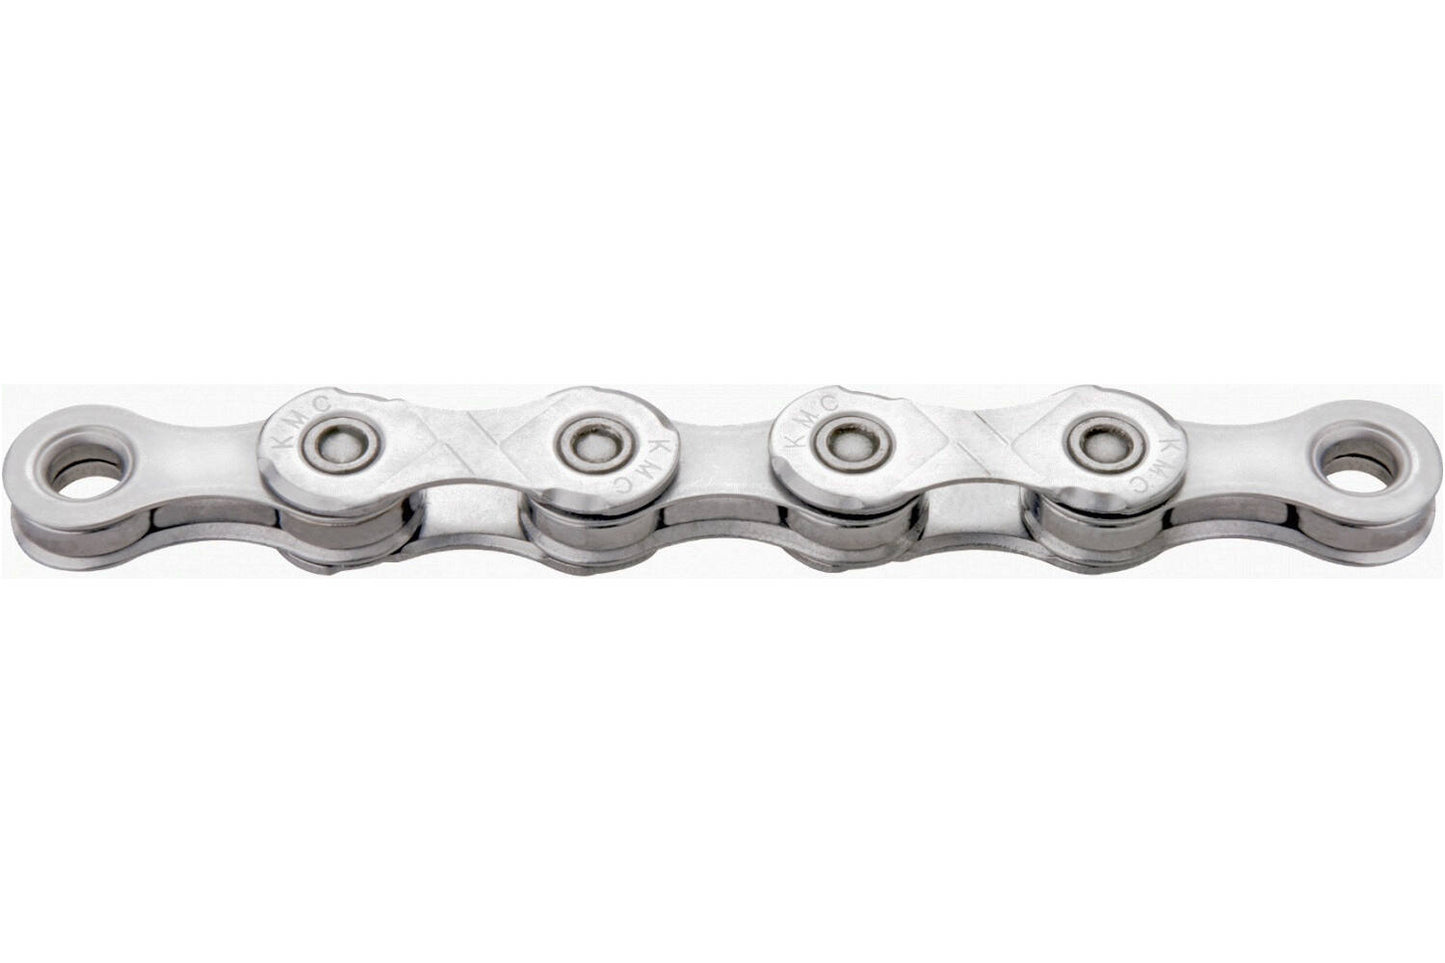 KMC X12 Silver Bicycle Chain 126 Links